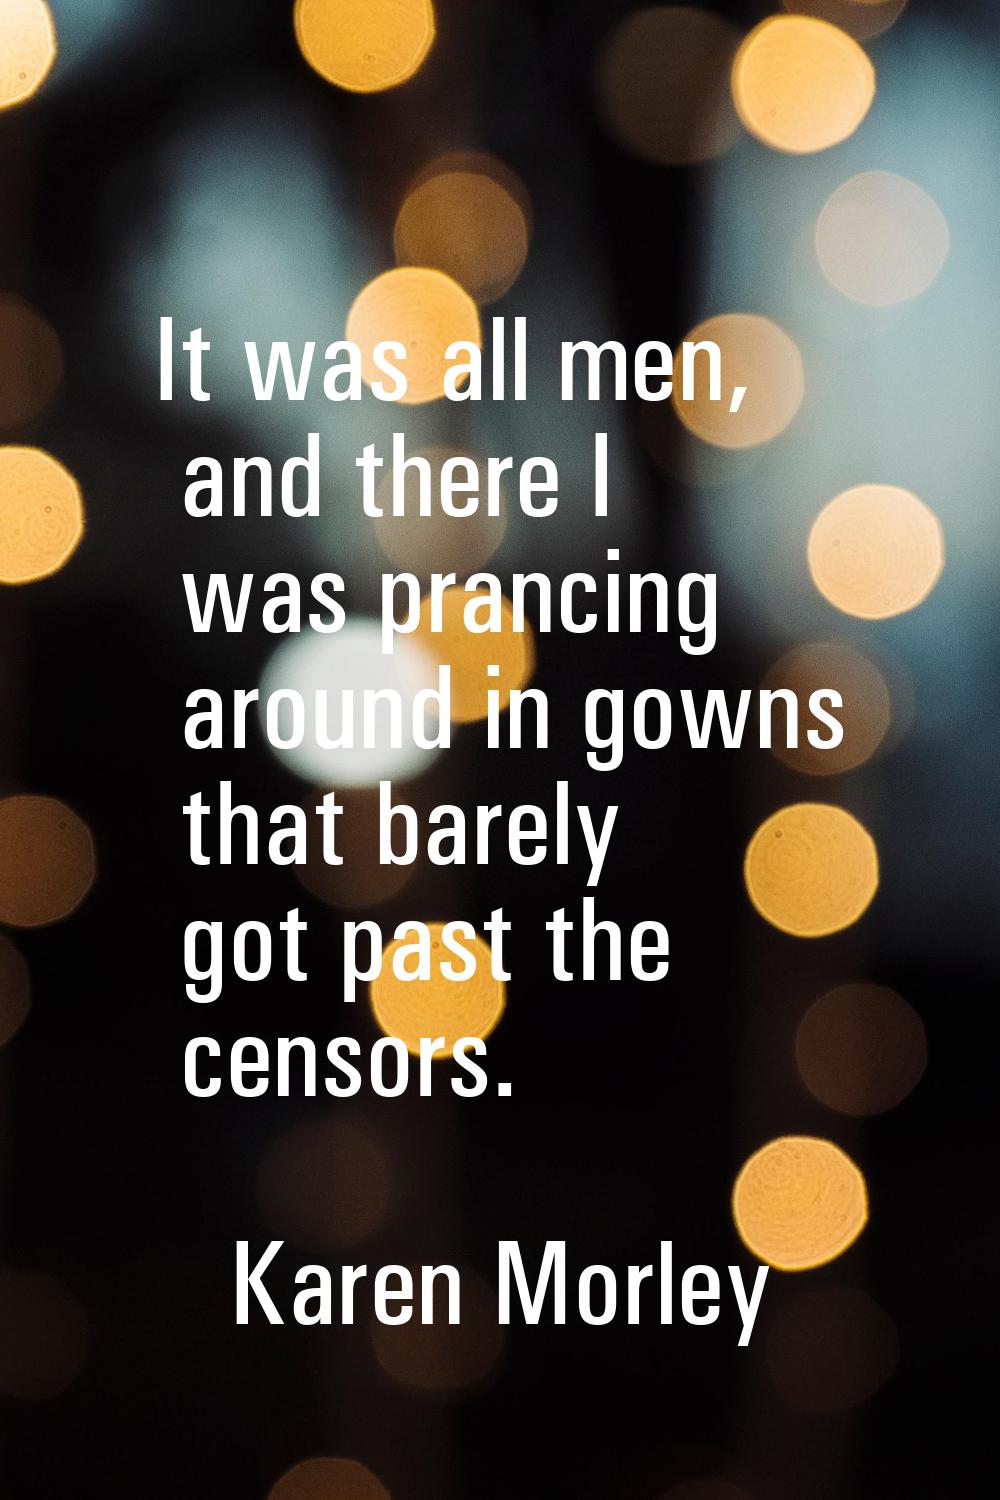 It was all men, and there I was prancing around in gowns that barely got past the censors.